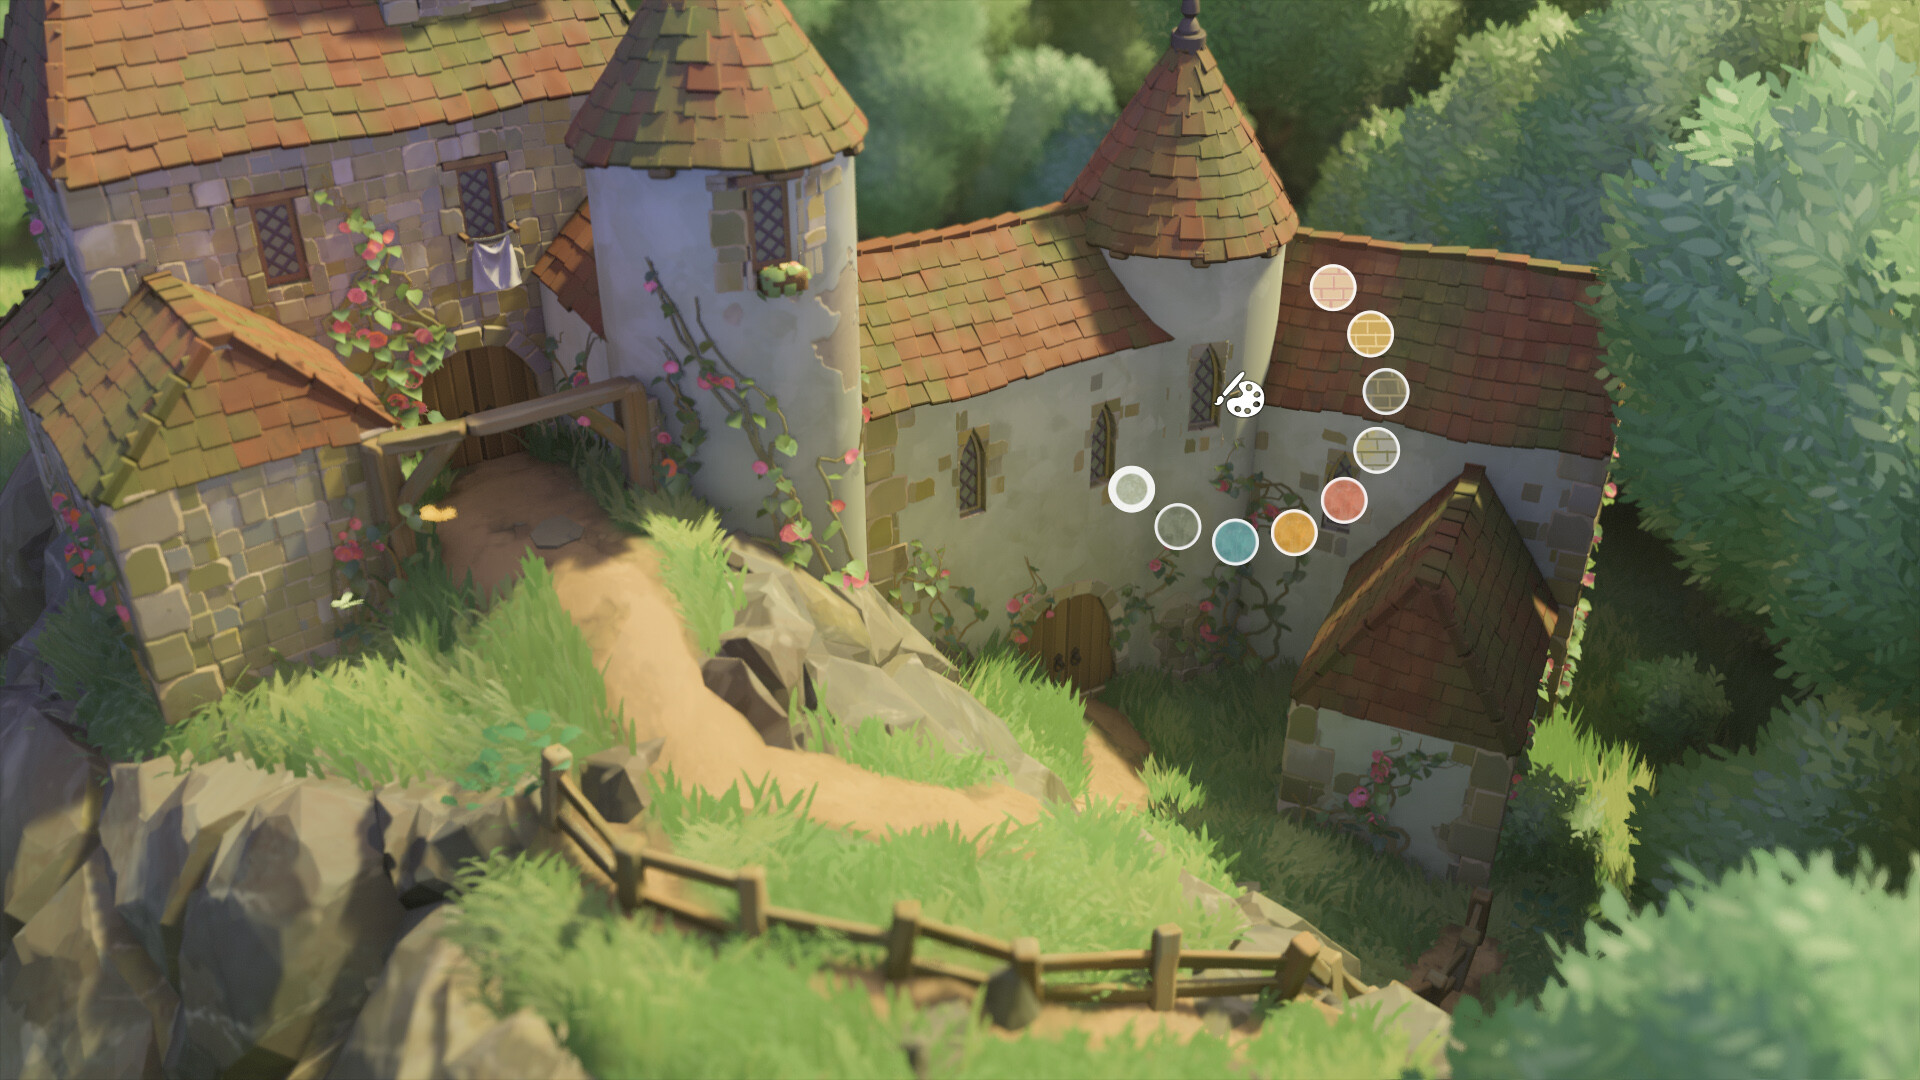 Tiny Glade - a small stone hamelt on a grassy hill with an open swatch selector for wall color